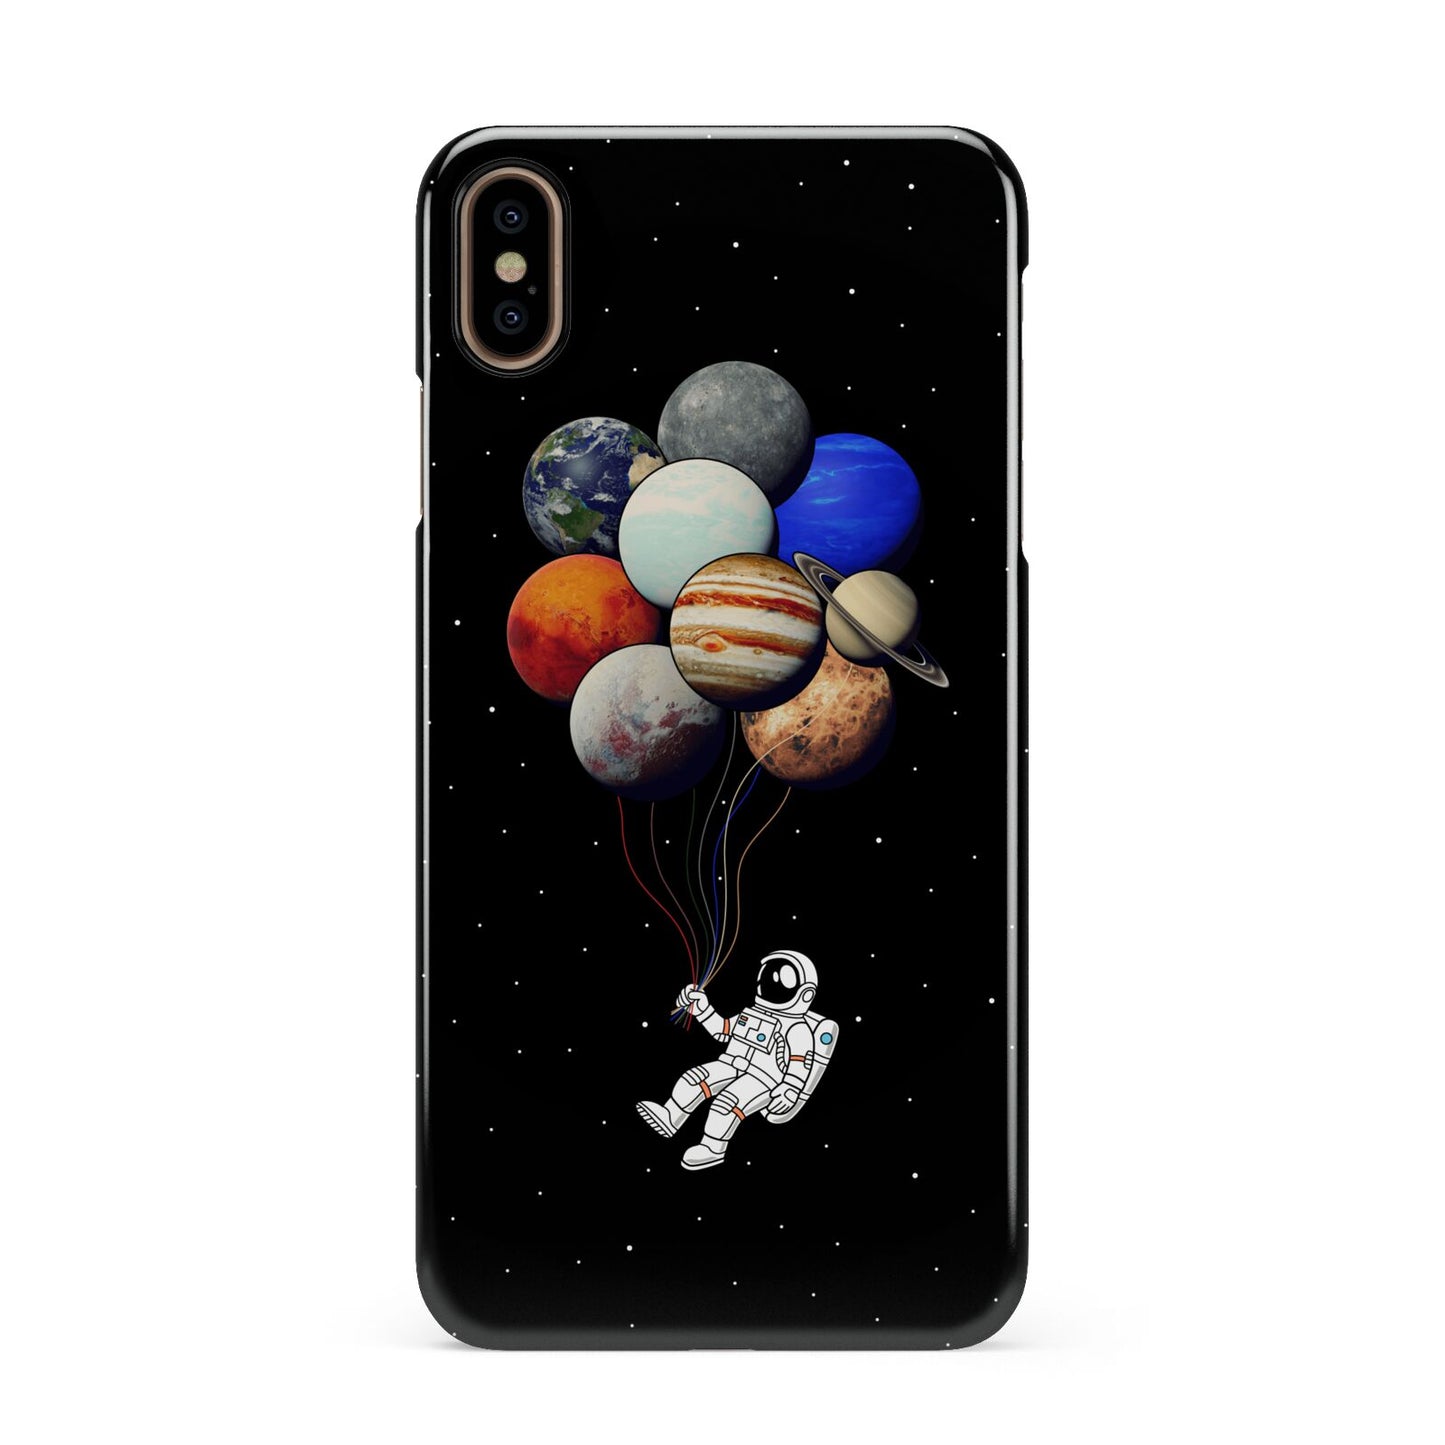 Astronaut Planet Balloons Apple iPhone Xs Max 3D Snap Case